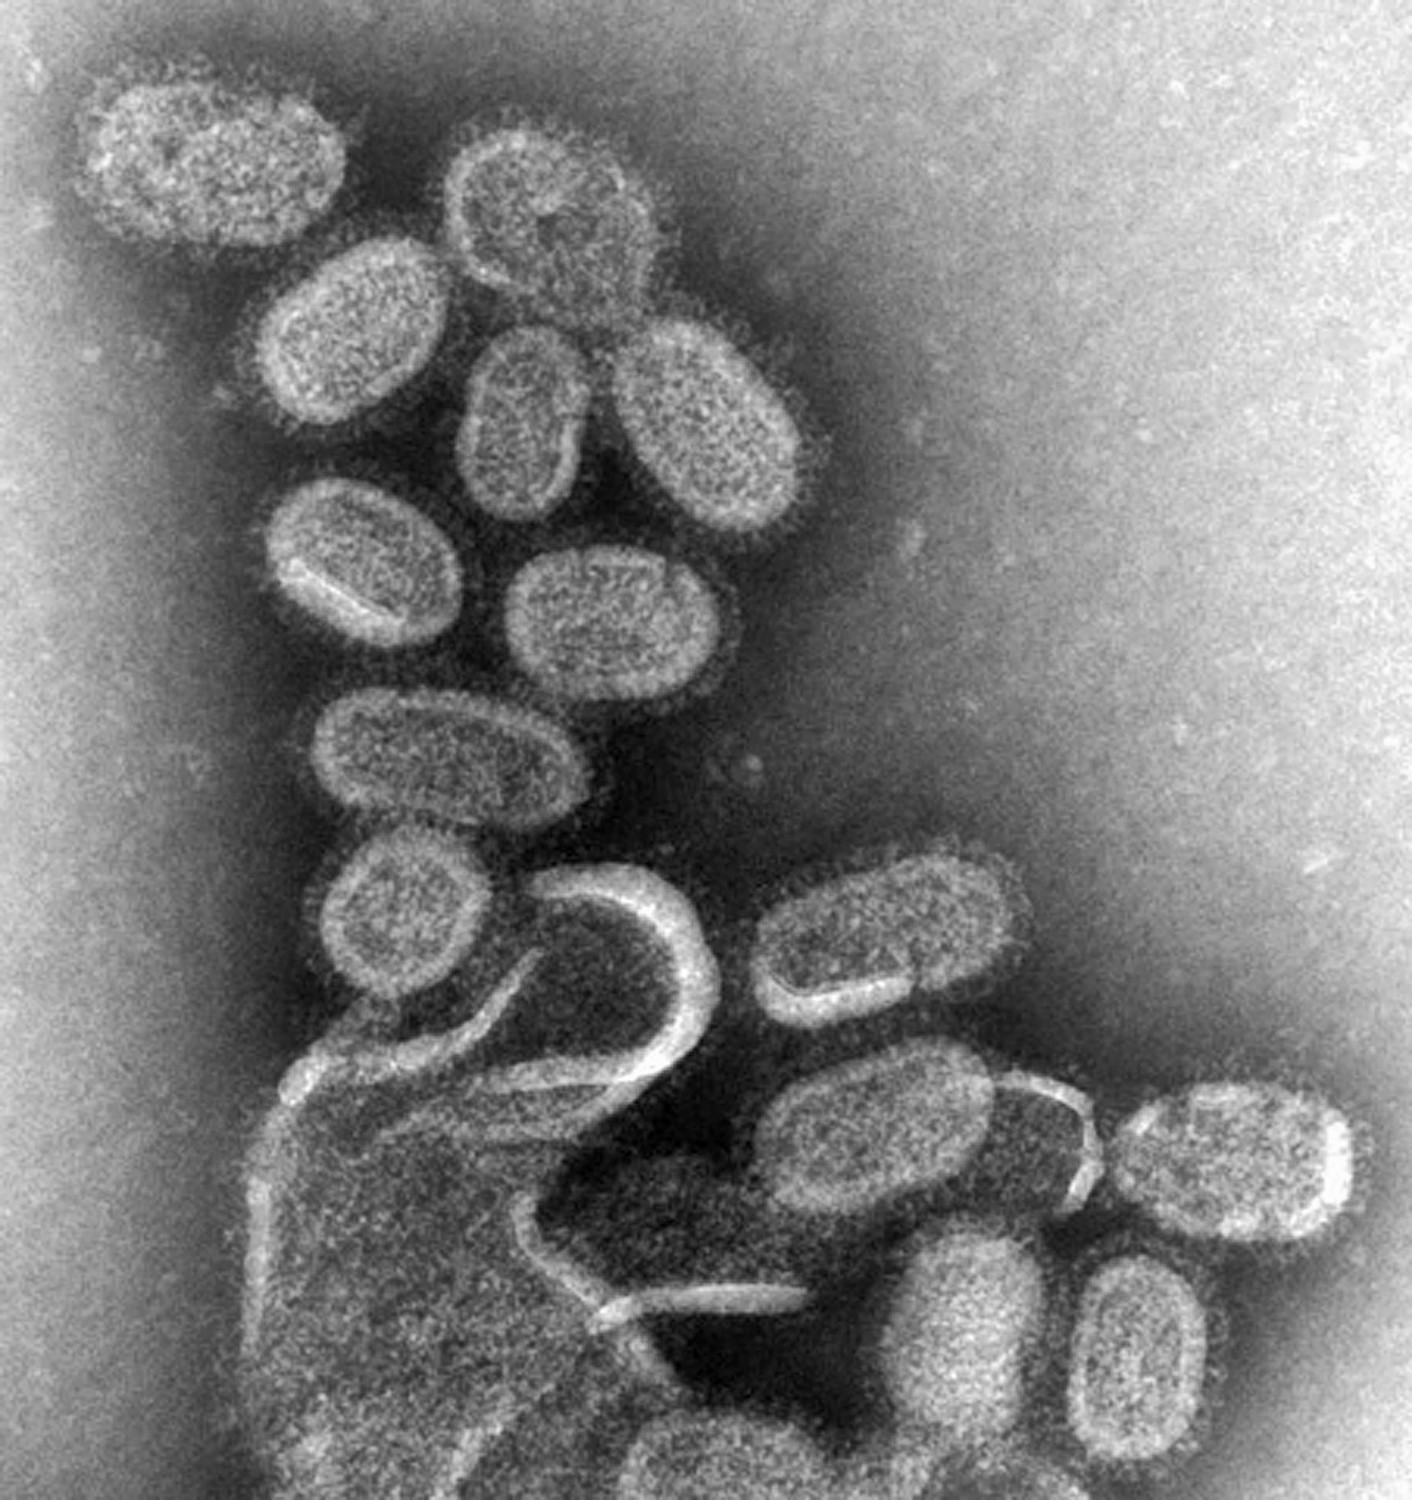 black and white electron microscope image of a bunch of oval shaped viruses with spikes around the surface bursting from cell debris